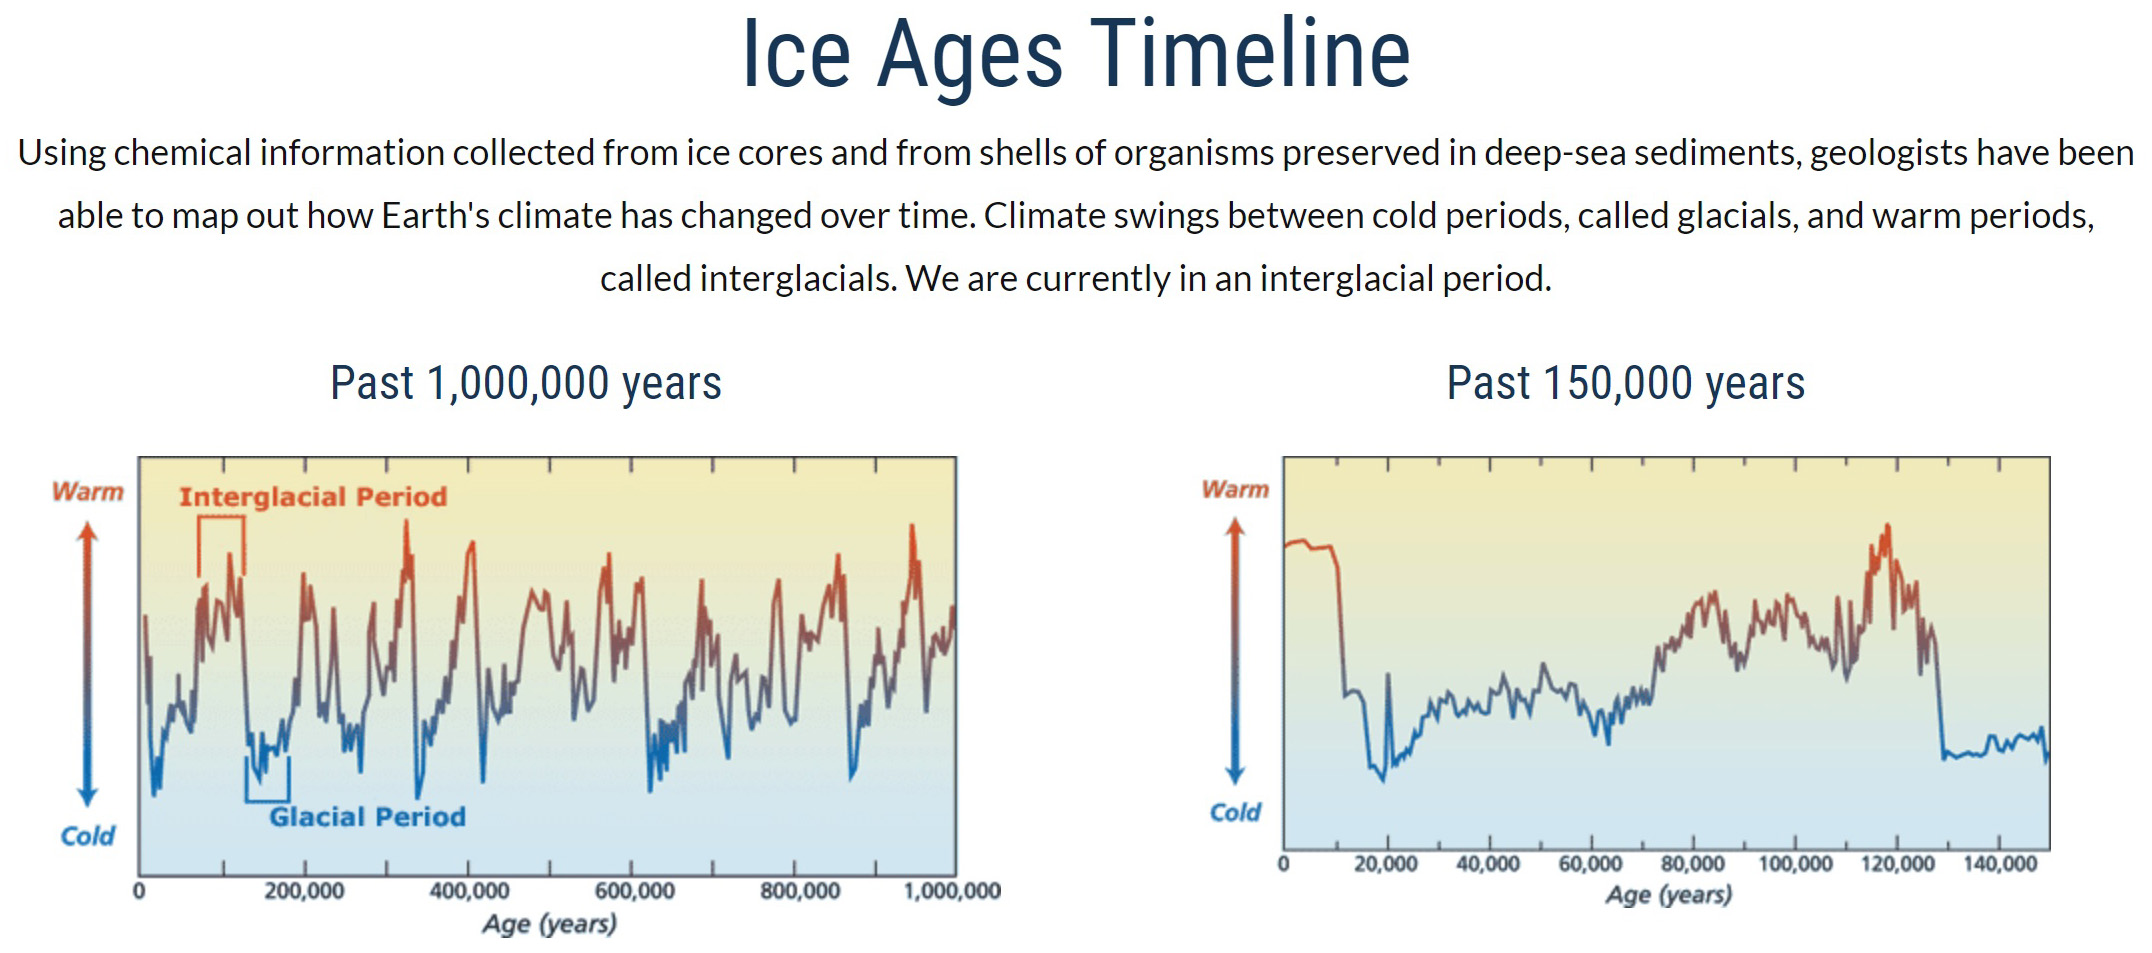 Ice Ages Timeline